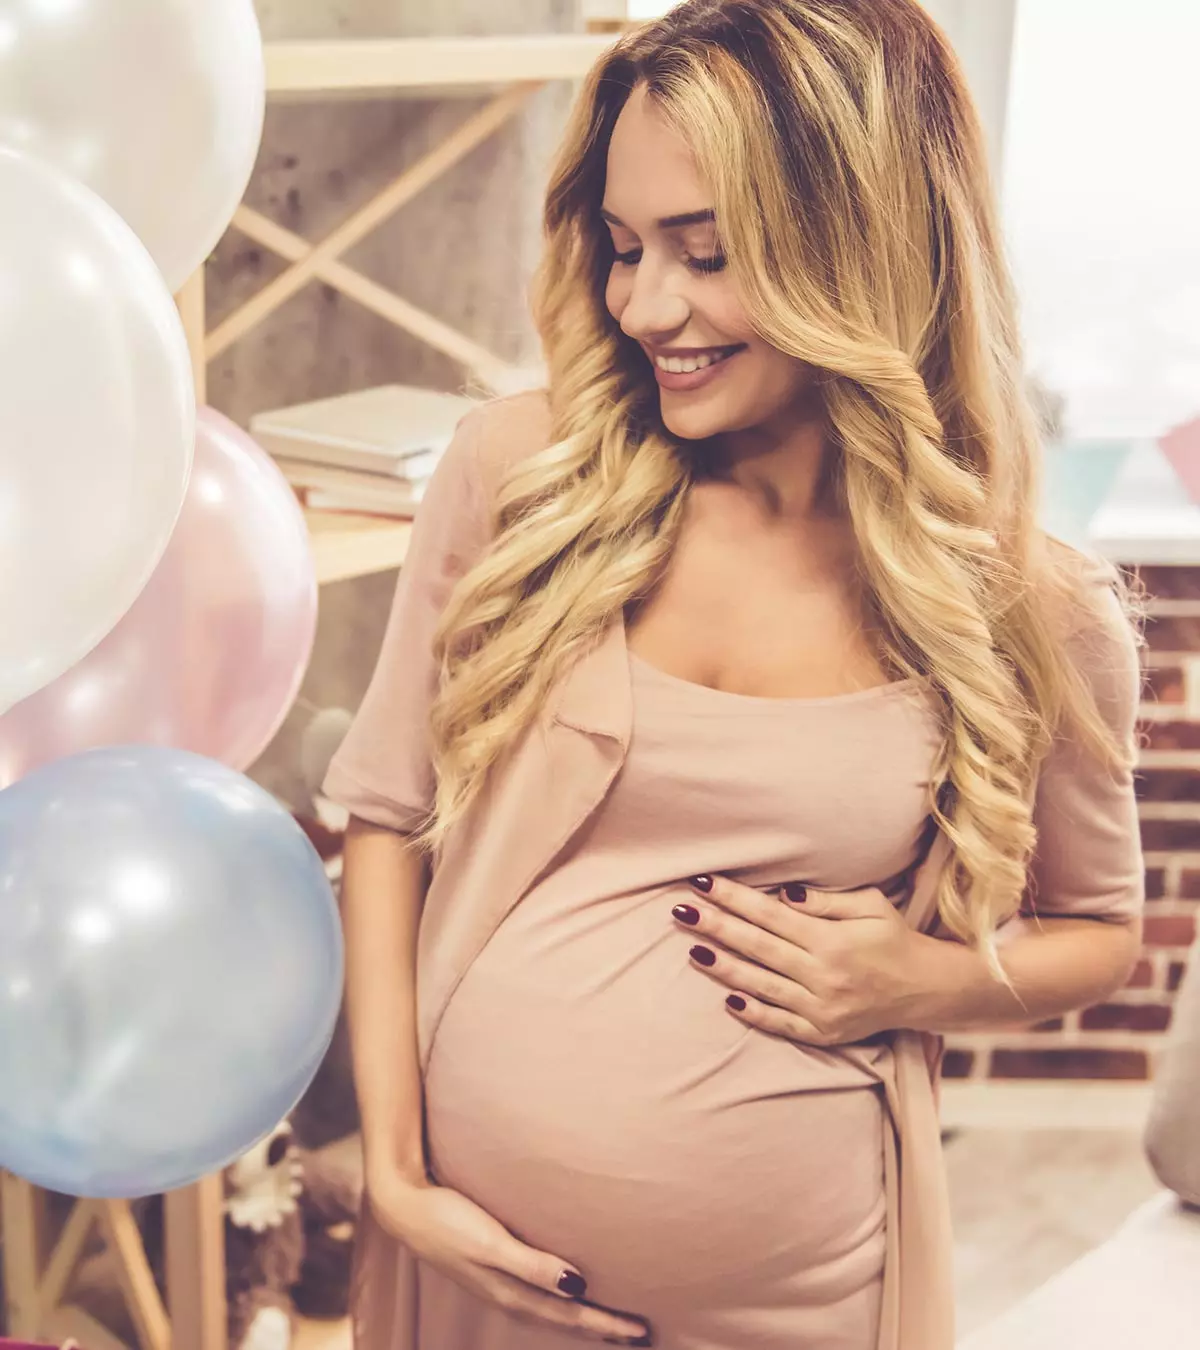 Good Thoughts During Pregnancy Comes From These Mantras